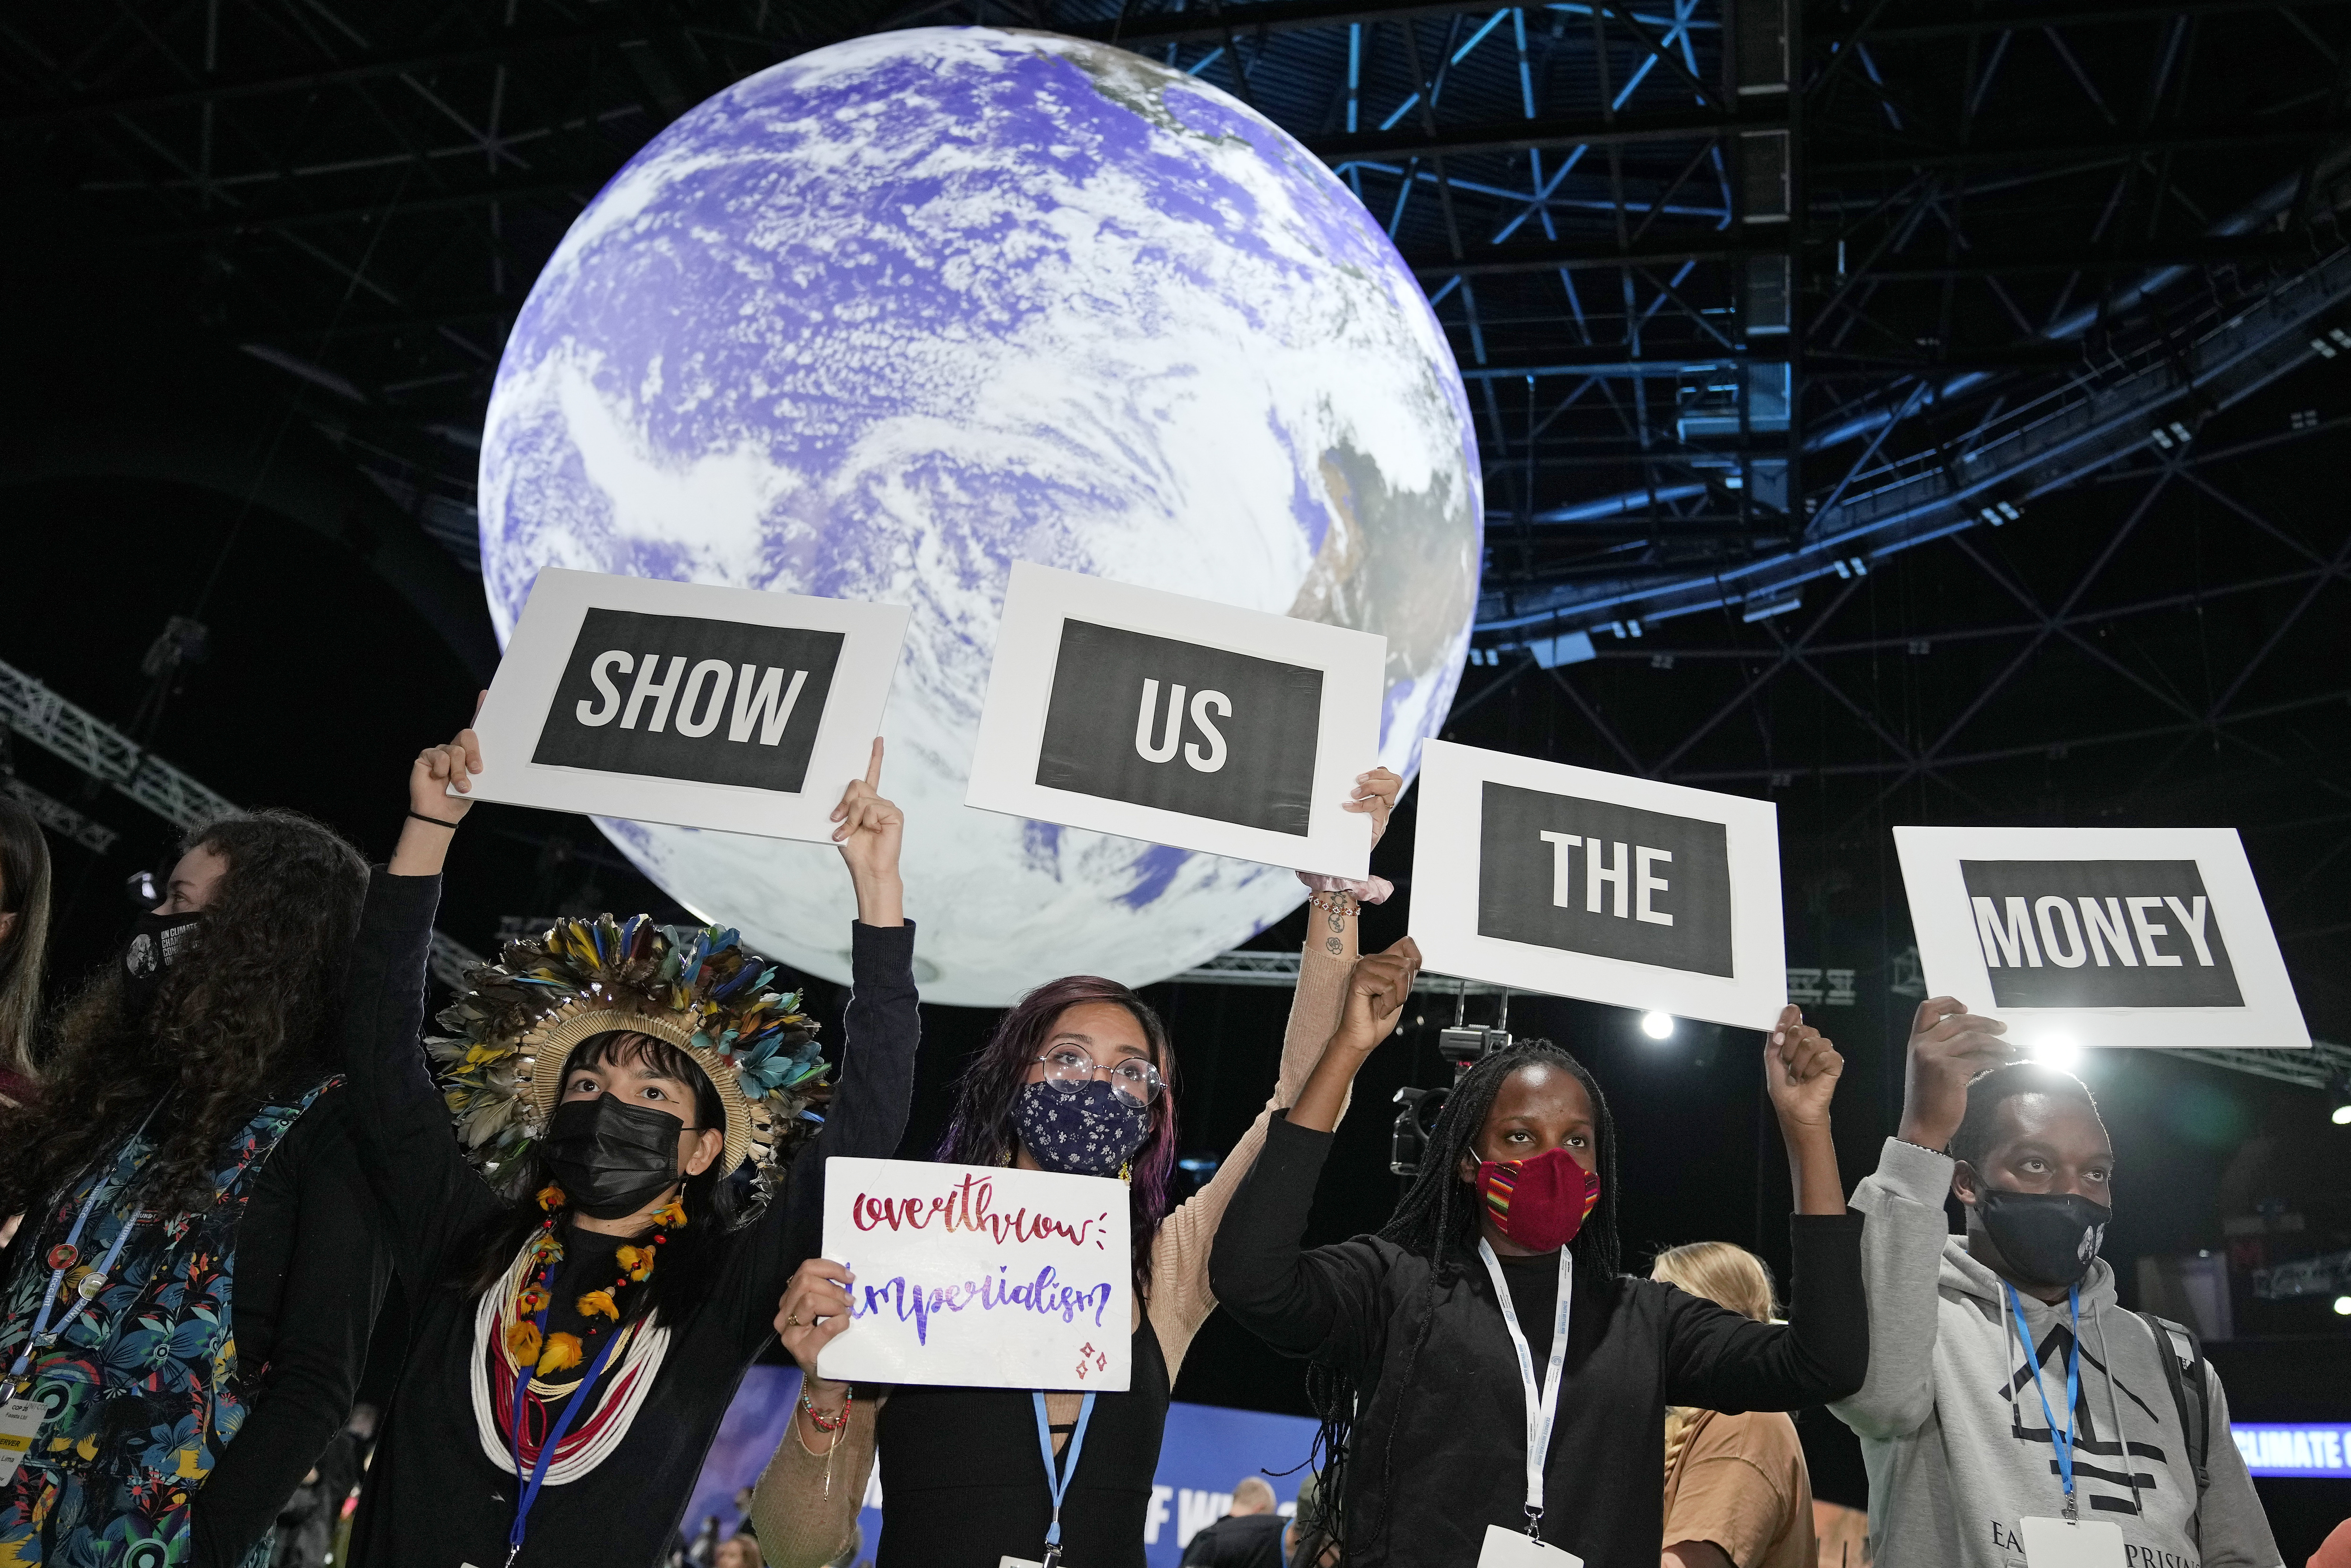 Masked protesters outside of the UN climate talks in Glasgow, Scotland, hold signs that read “SHOW US THE MONEY”